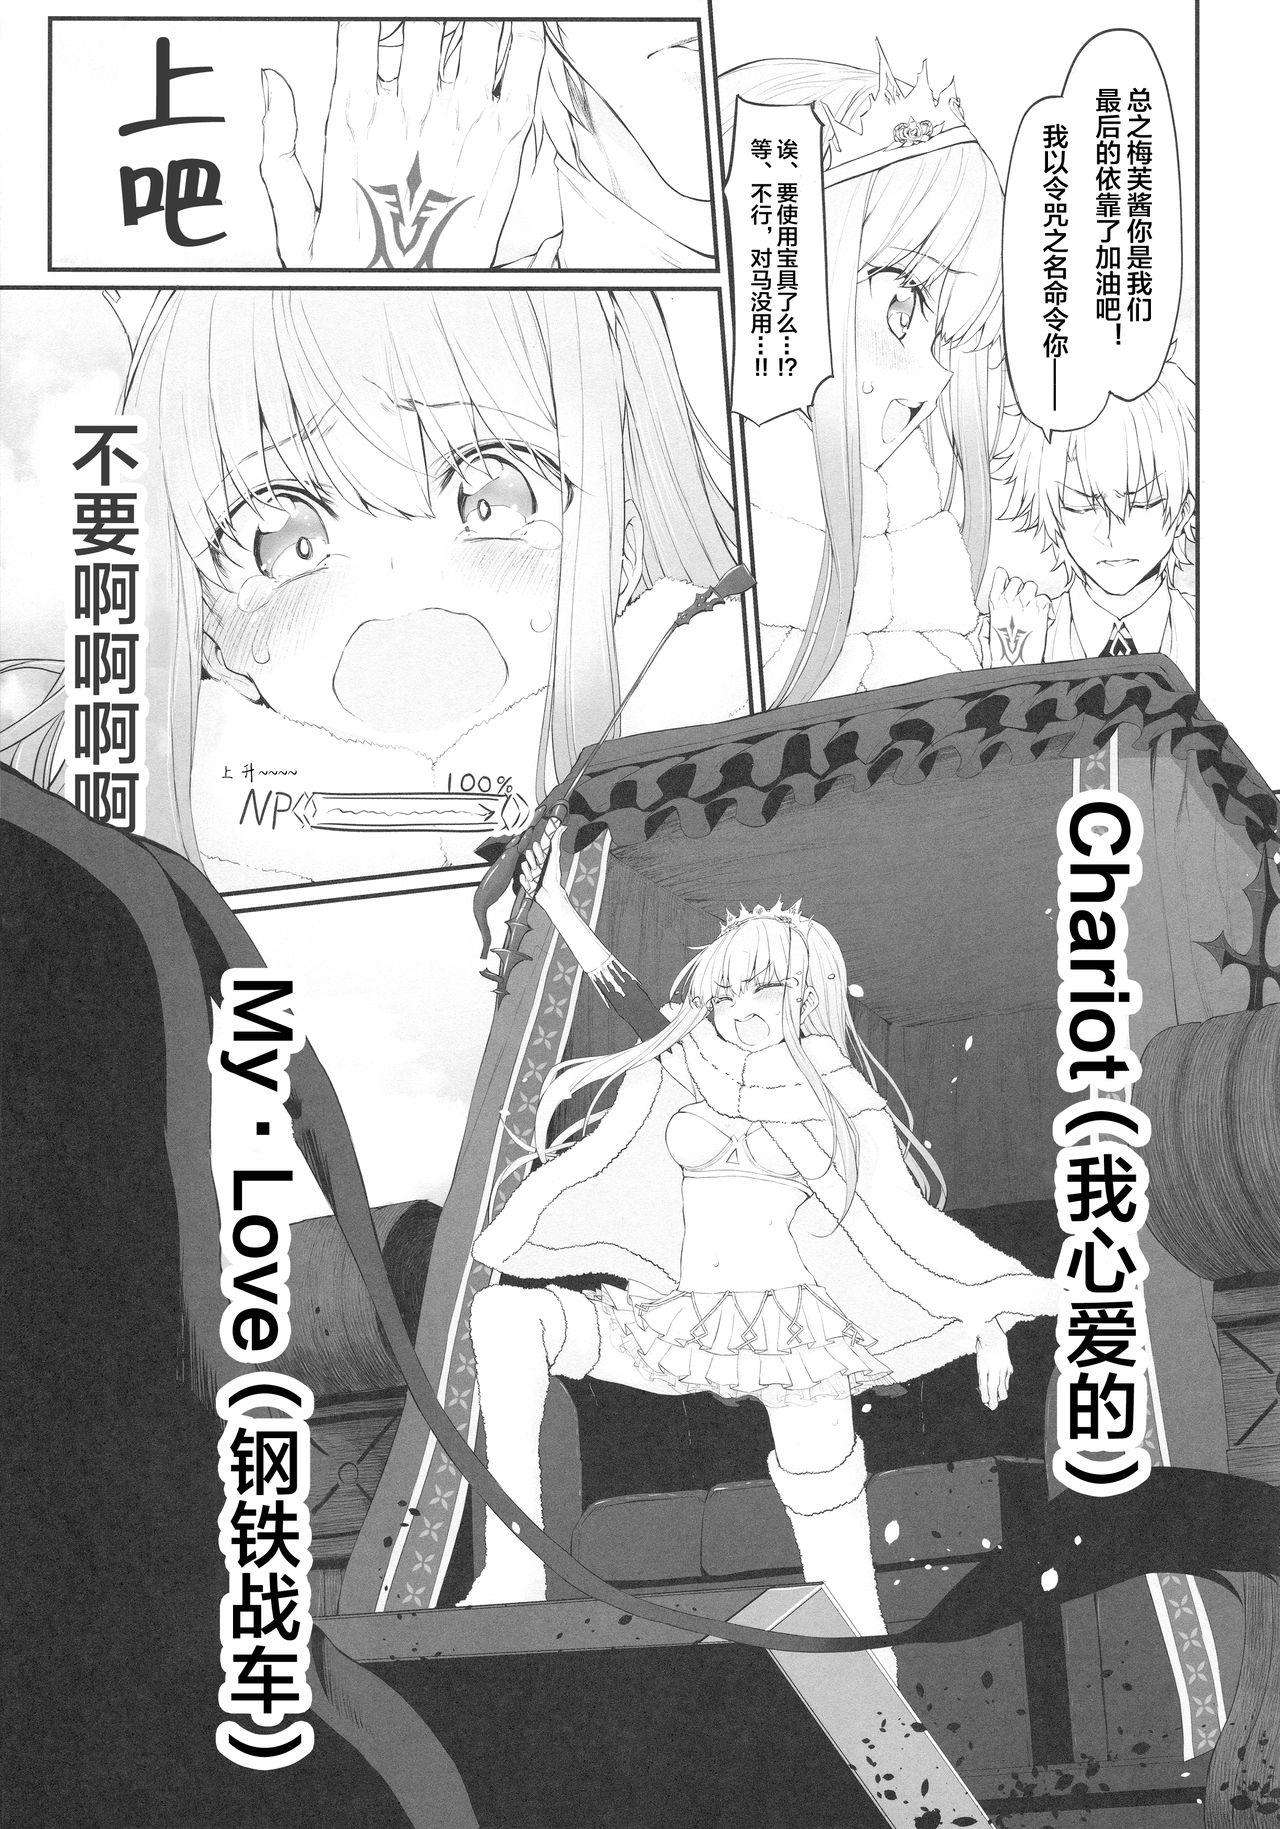 Brunet Marked Girls Vol. 16 - Fate grand order Chica - Page 5